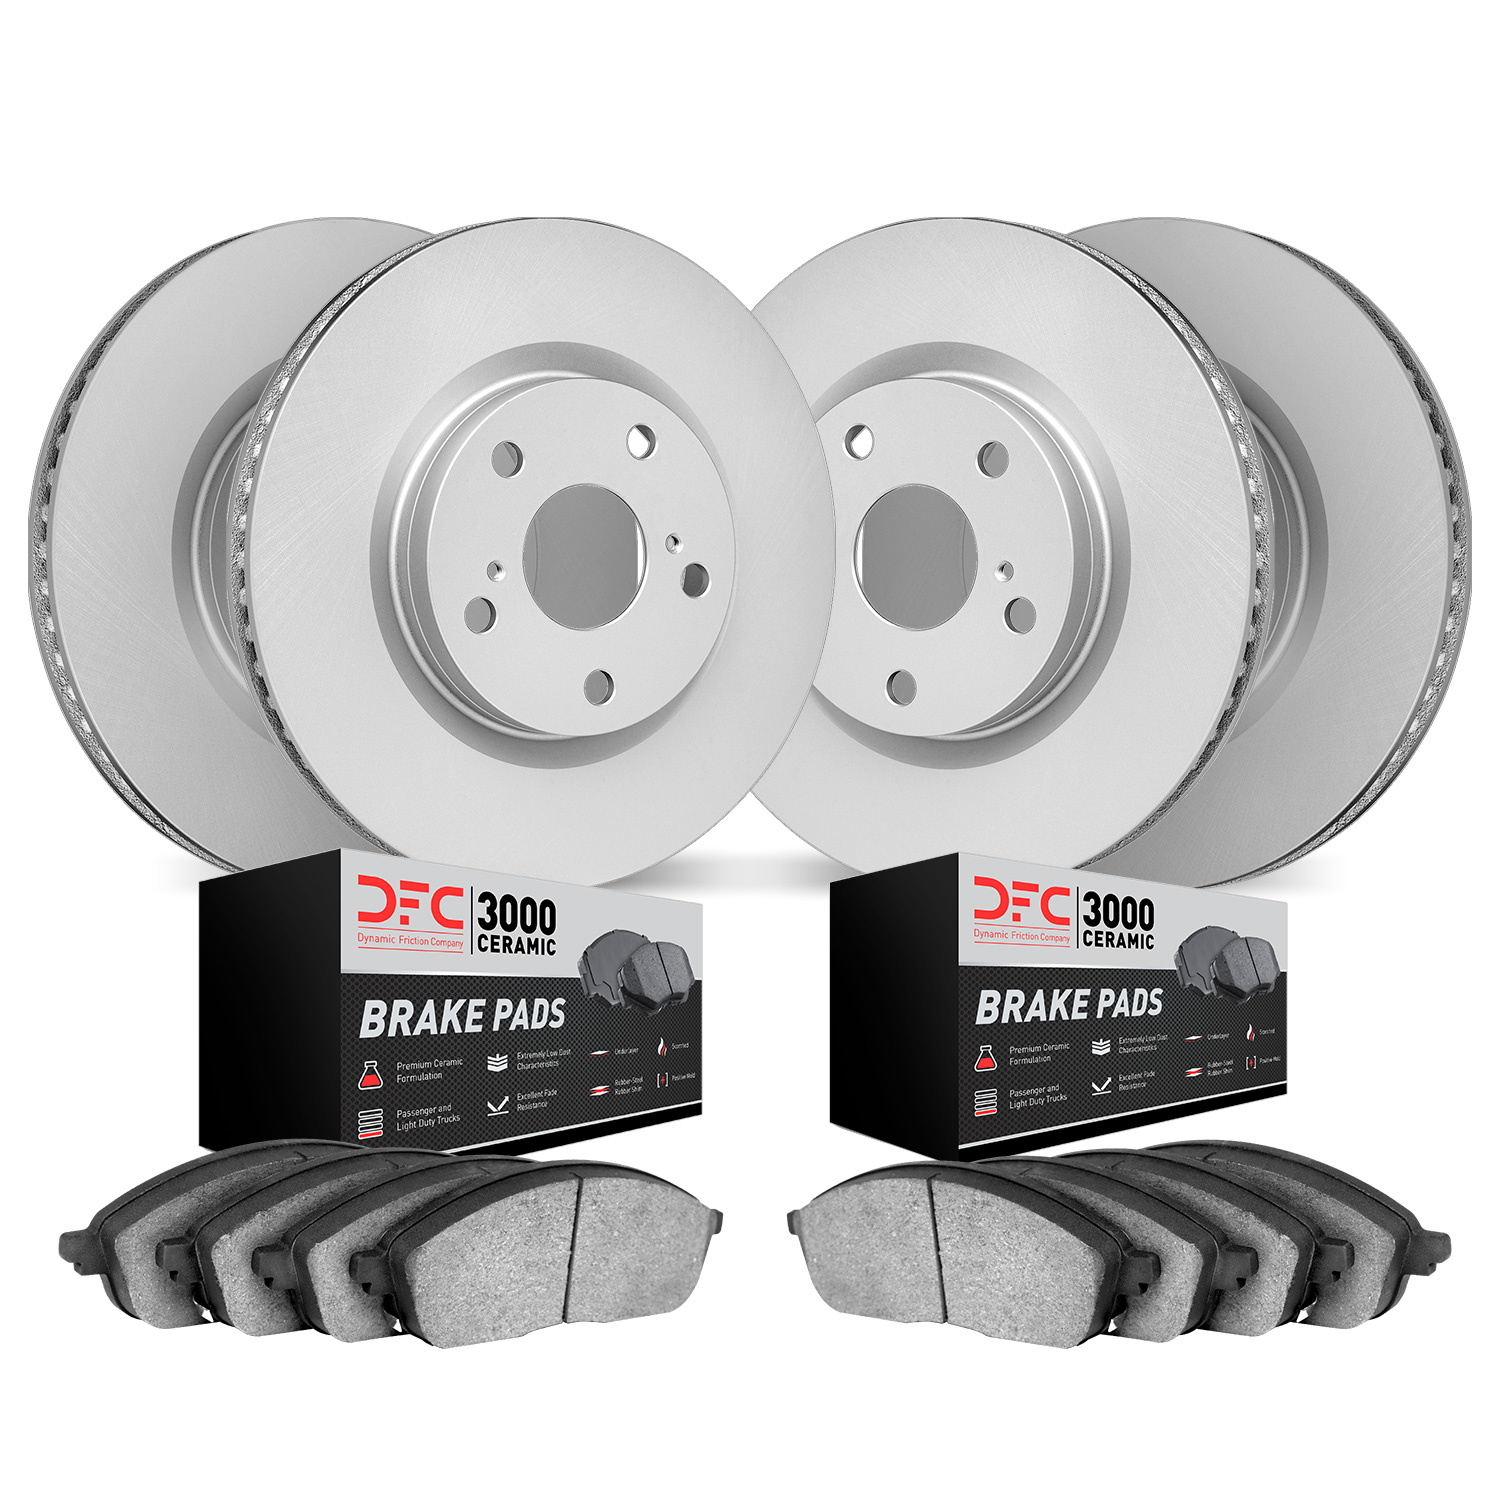 4304-31030 Geospec Brake Rotors with 3000-Series Ceramic Brake Pads Kit, 2004-2007 BMW, Position: Front and Rear